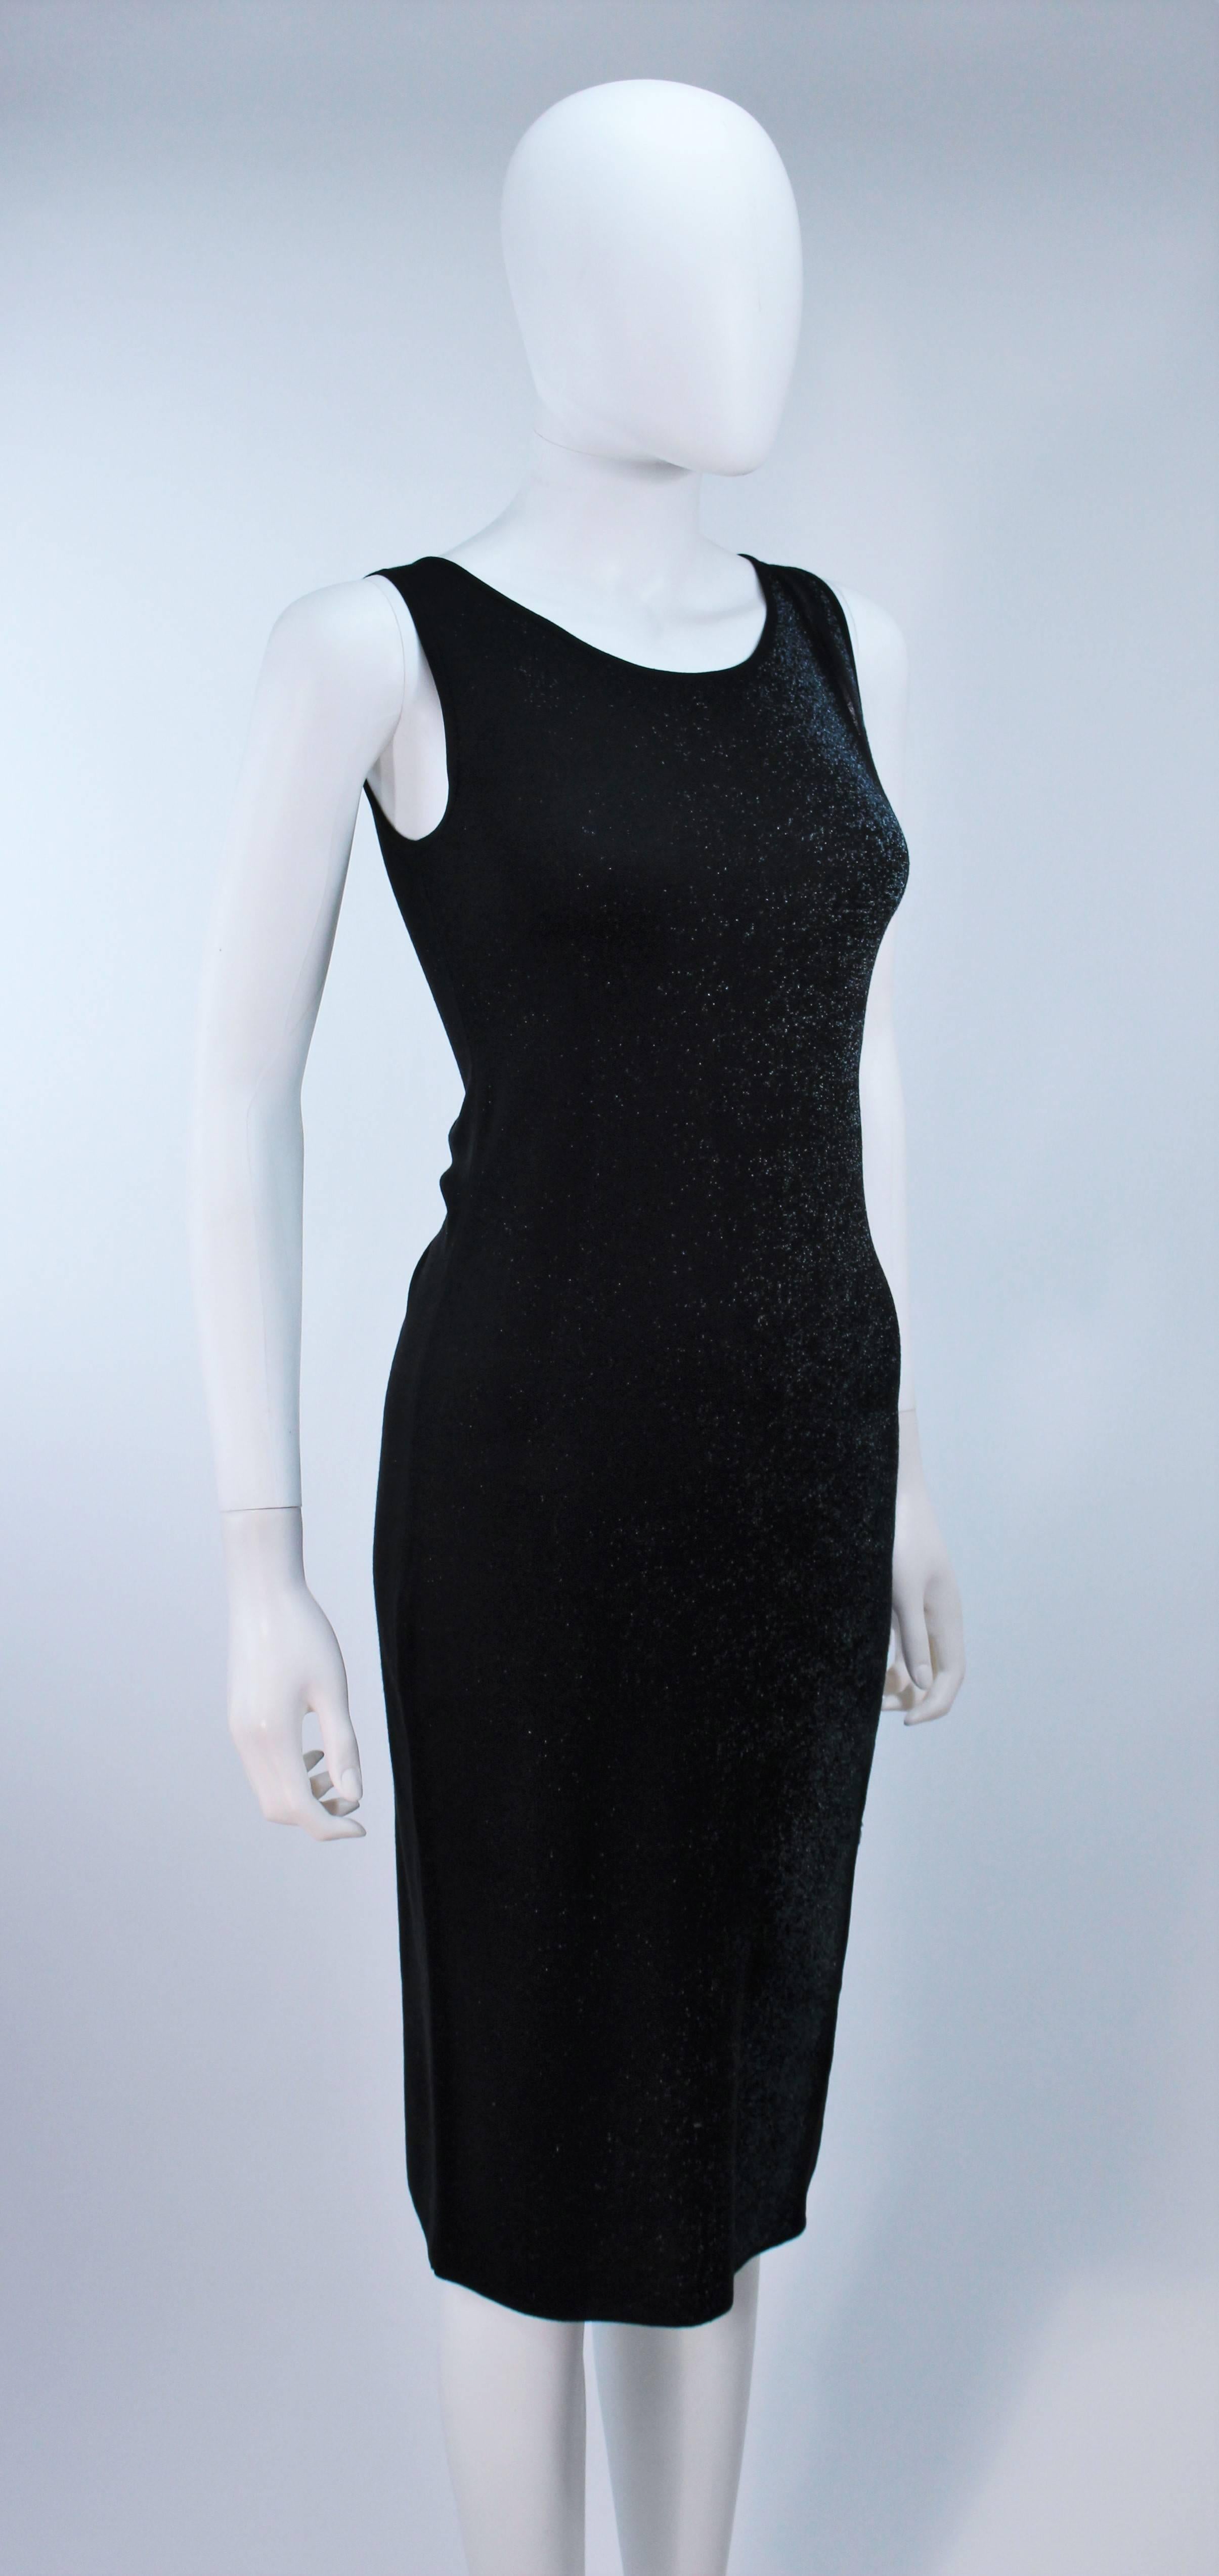 PORTS Black and Navy Metallic Stretch Dress with Sheer Detailing Size XS For Sale 1